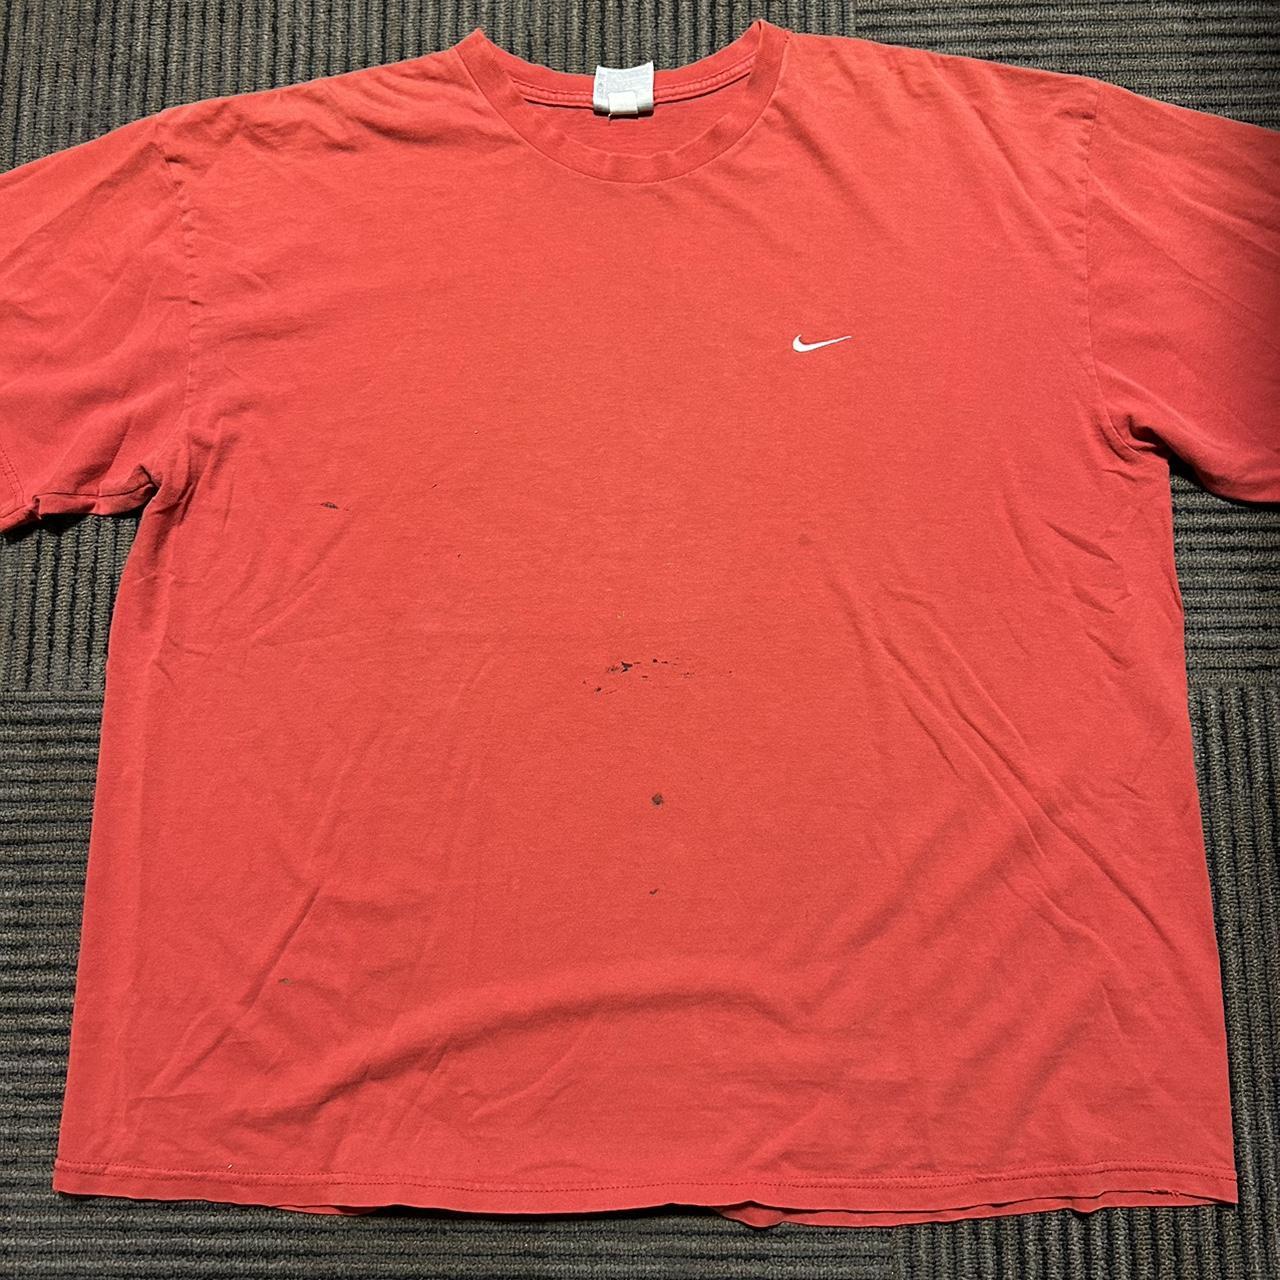 Nike Men's Red and White T-shirt (2)